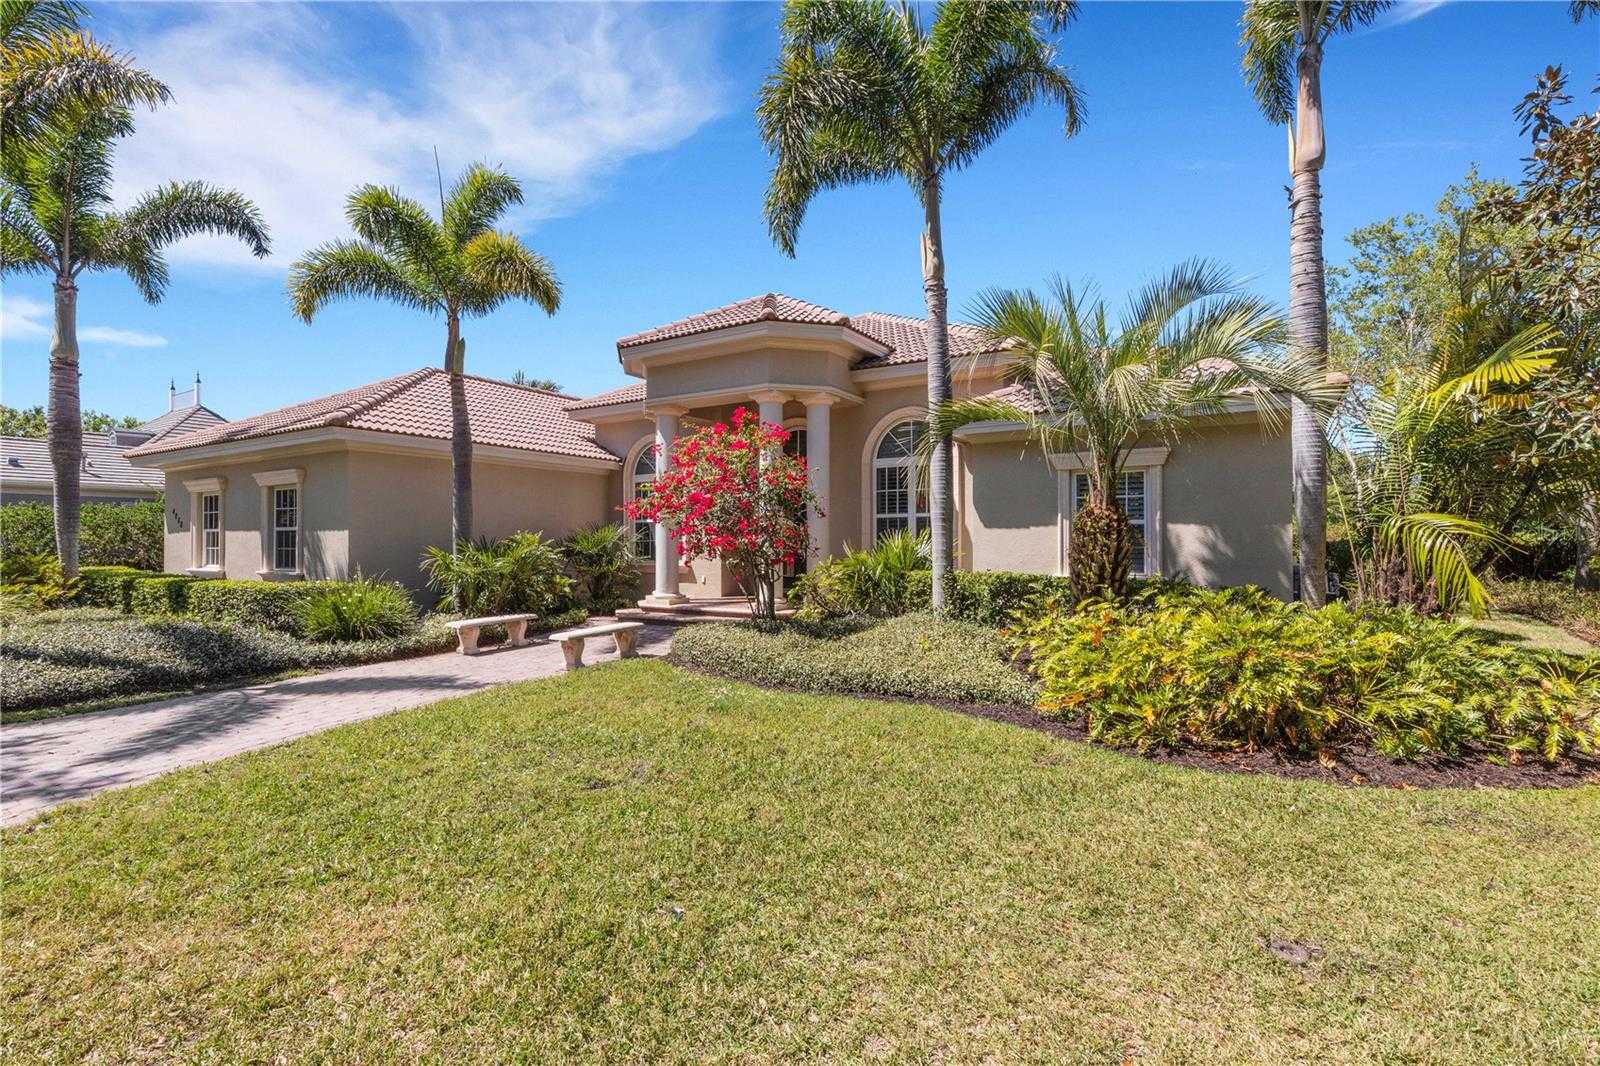 $2,395,000 - 3Br/4Ba -  for Sale in Founders Club, Sarasota